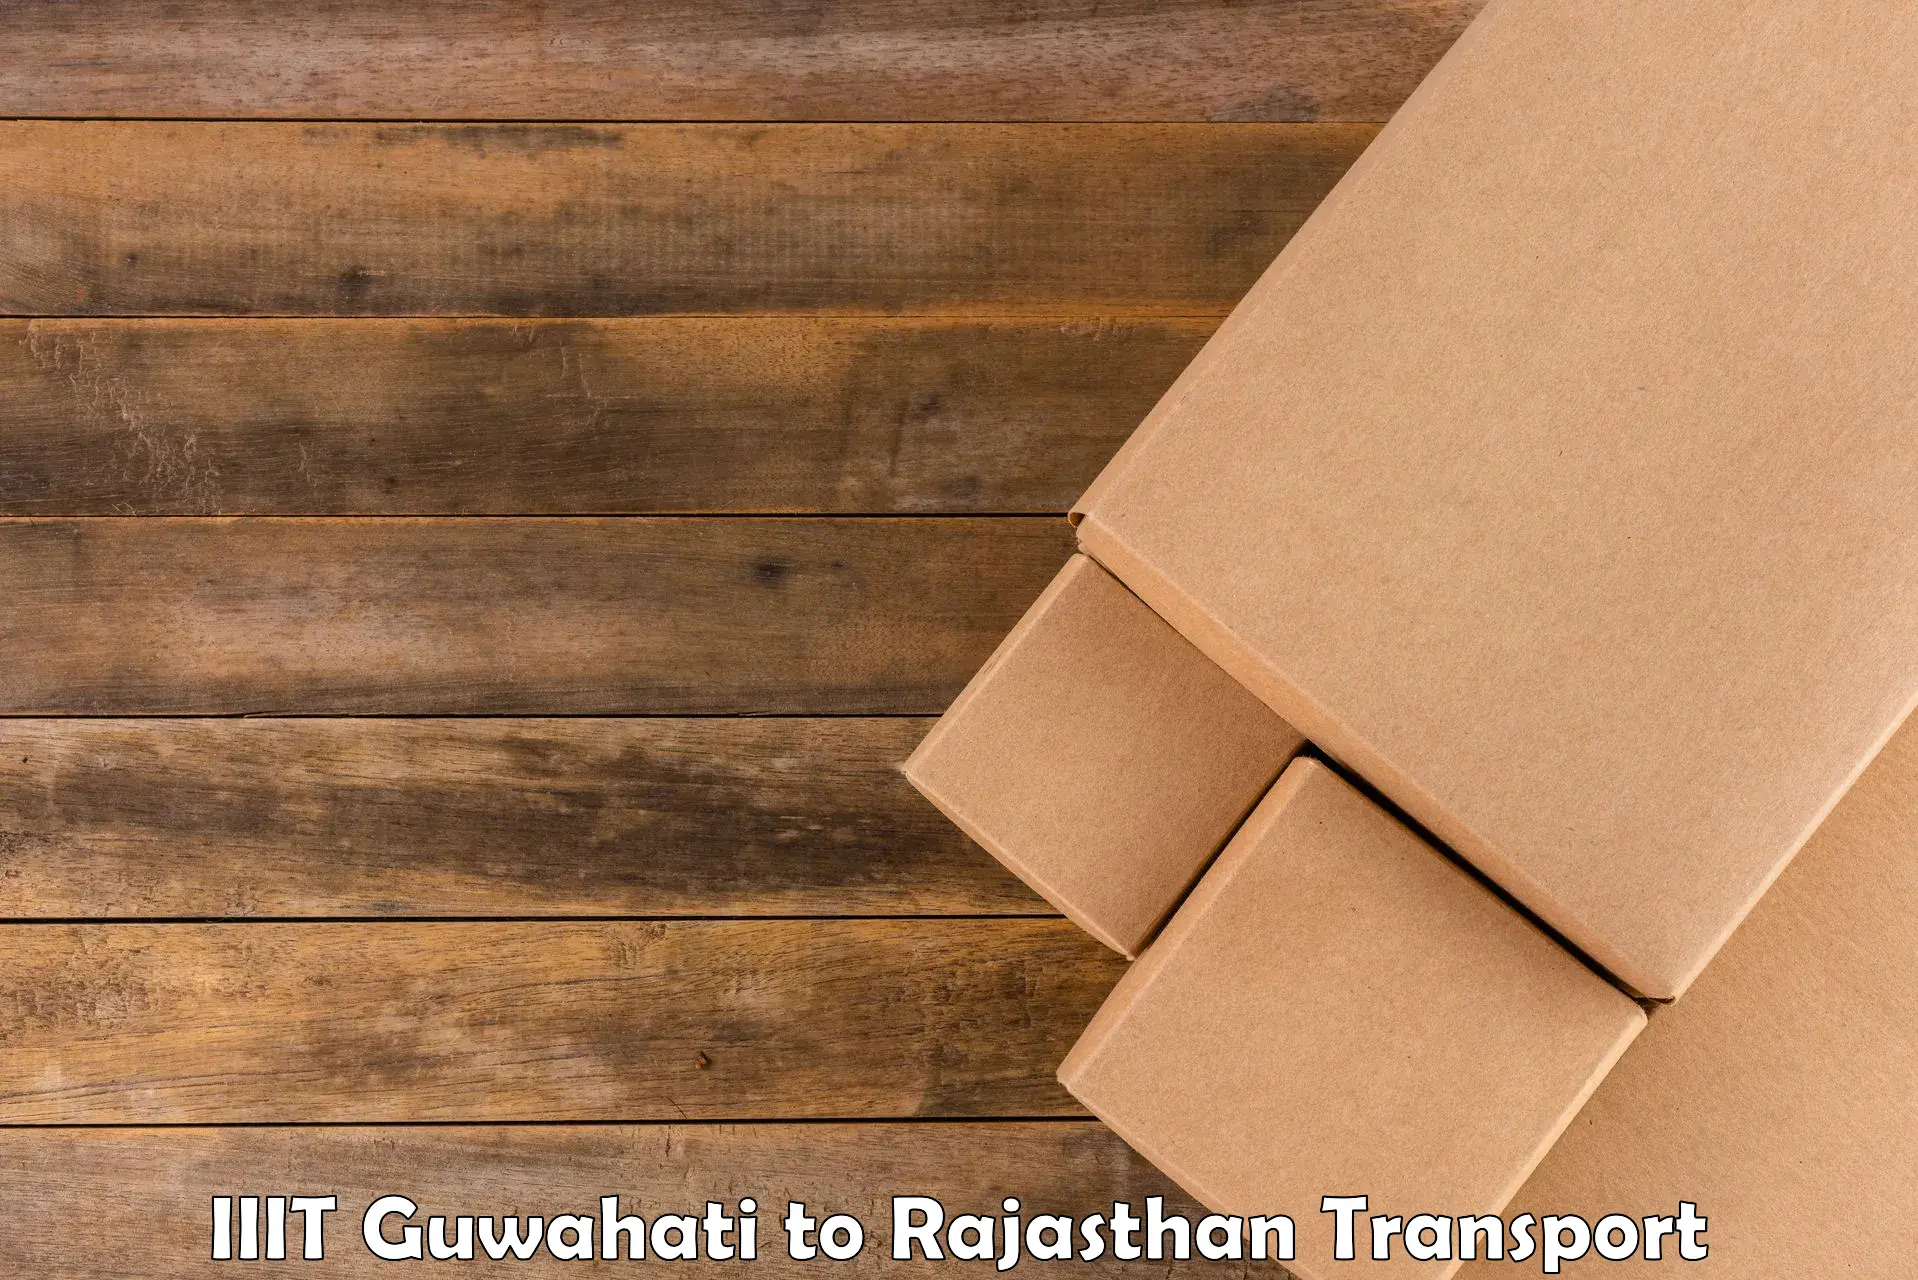 Container transport service in IIIT Guwahati to Pilani